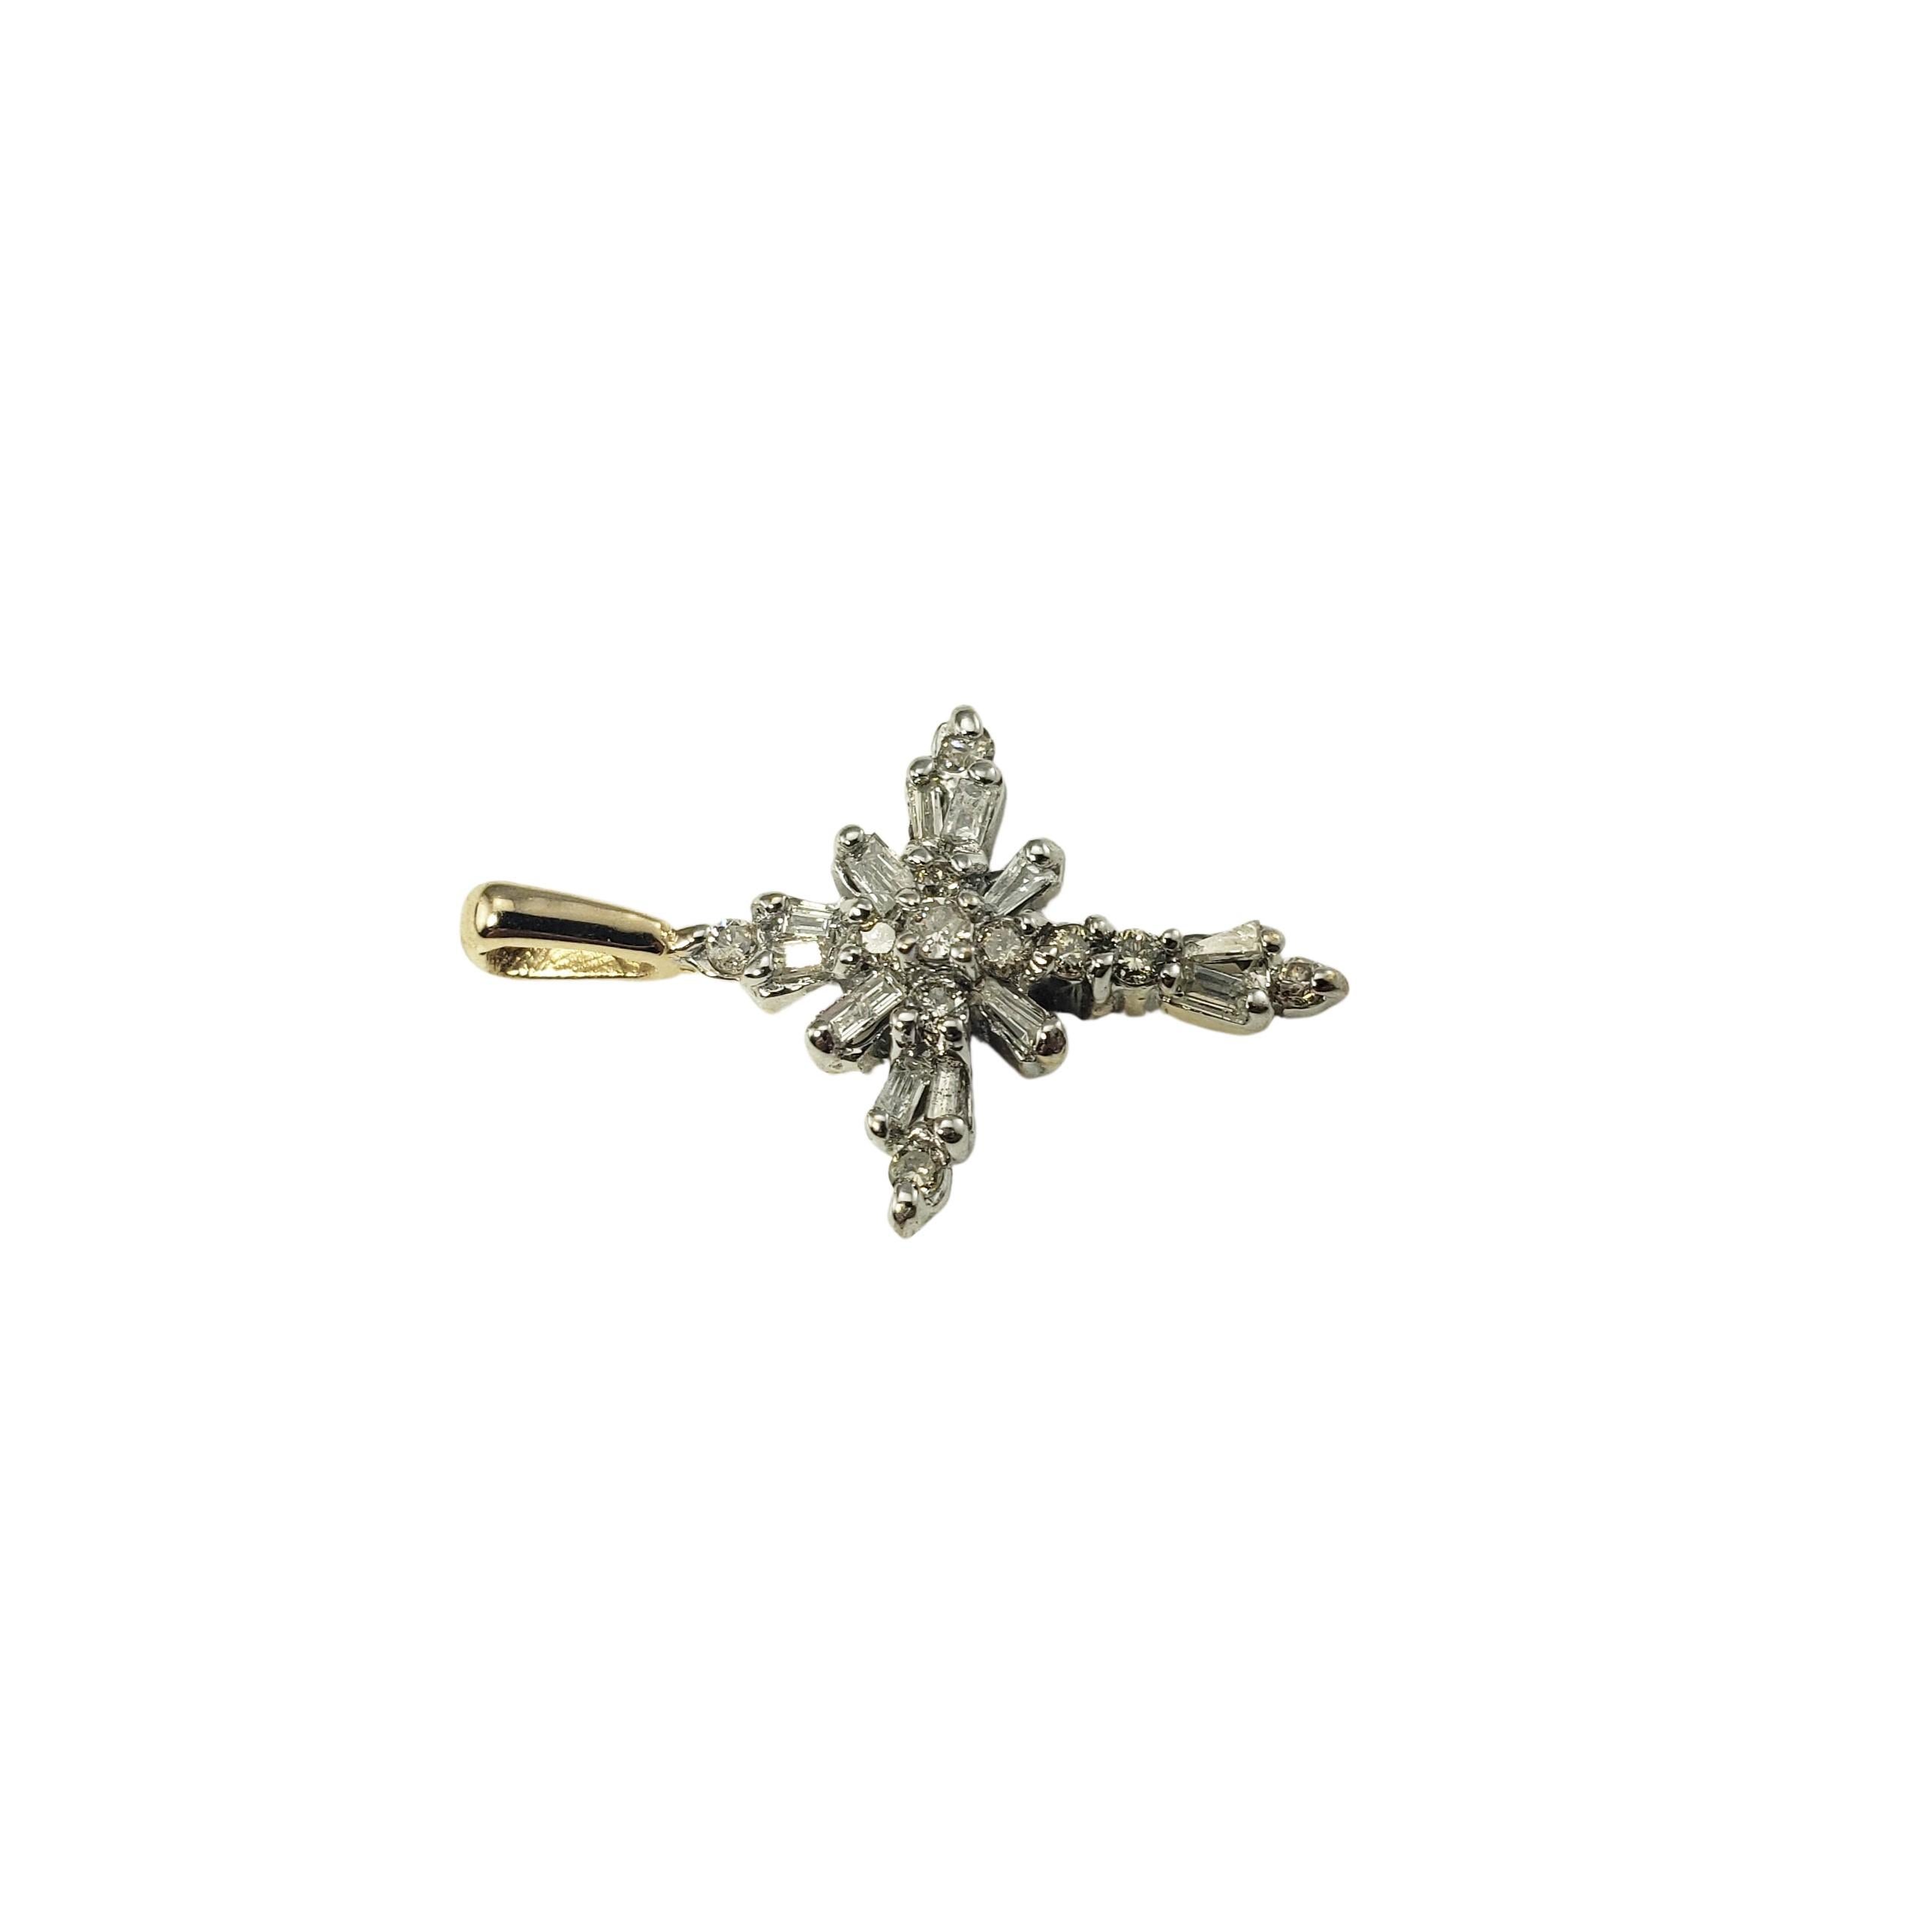 14 Karat Yellow Gold and Diamond Cross Pendant-

This sparkling cross pendant features 12 baguette diamonds and 11 round brilliant cut diamonds set in classic 14K yellow gold.

Approximate total diamond weight:   .40 ct.

Diamond color: 